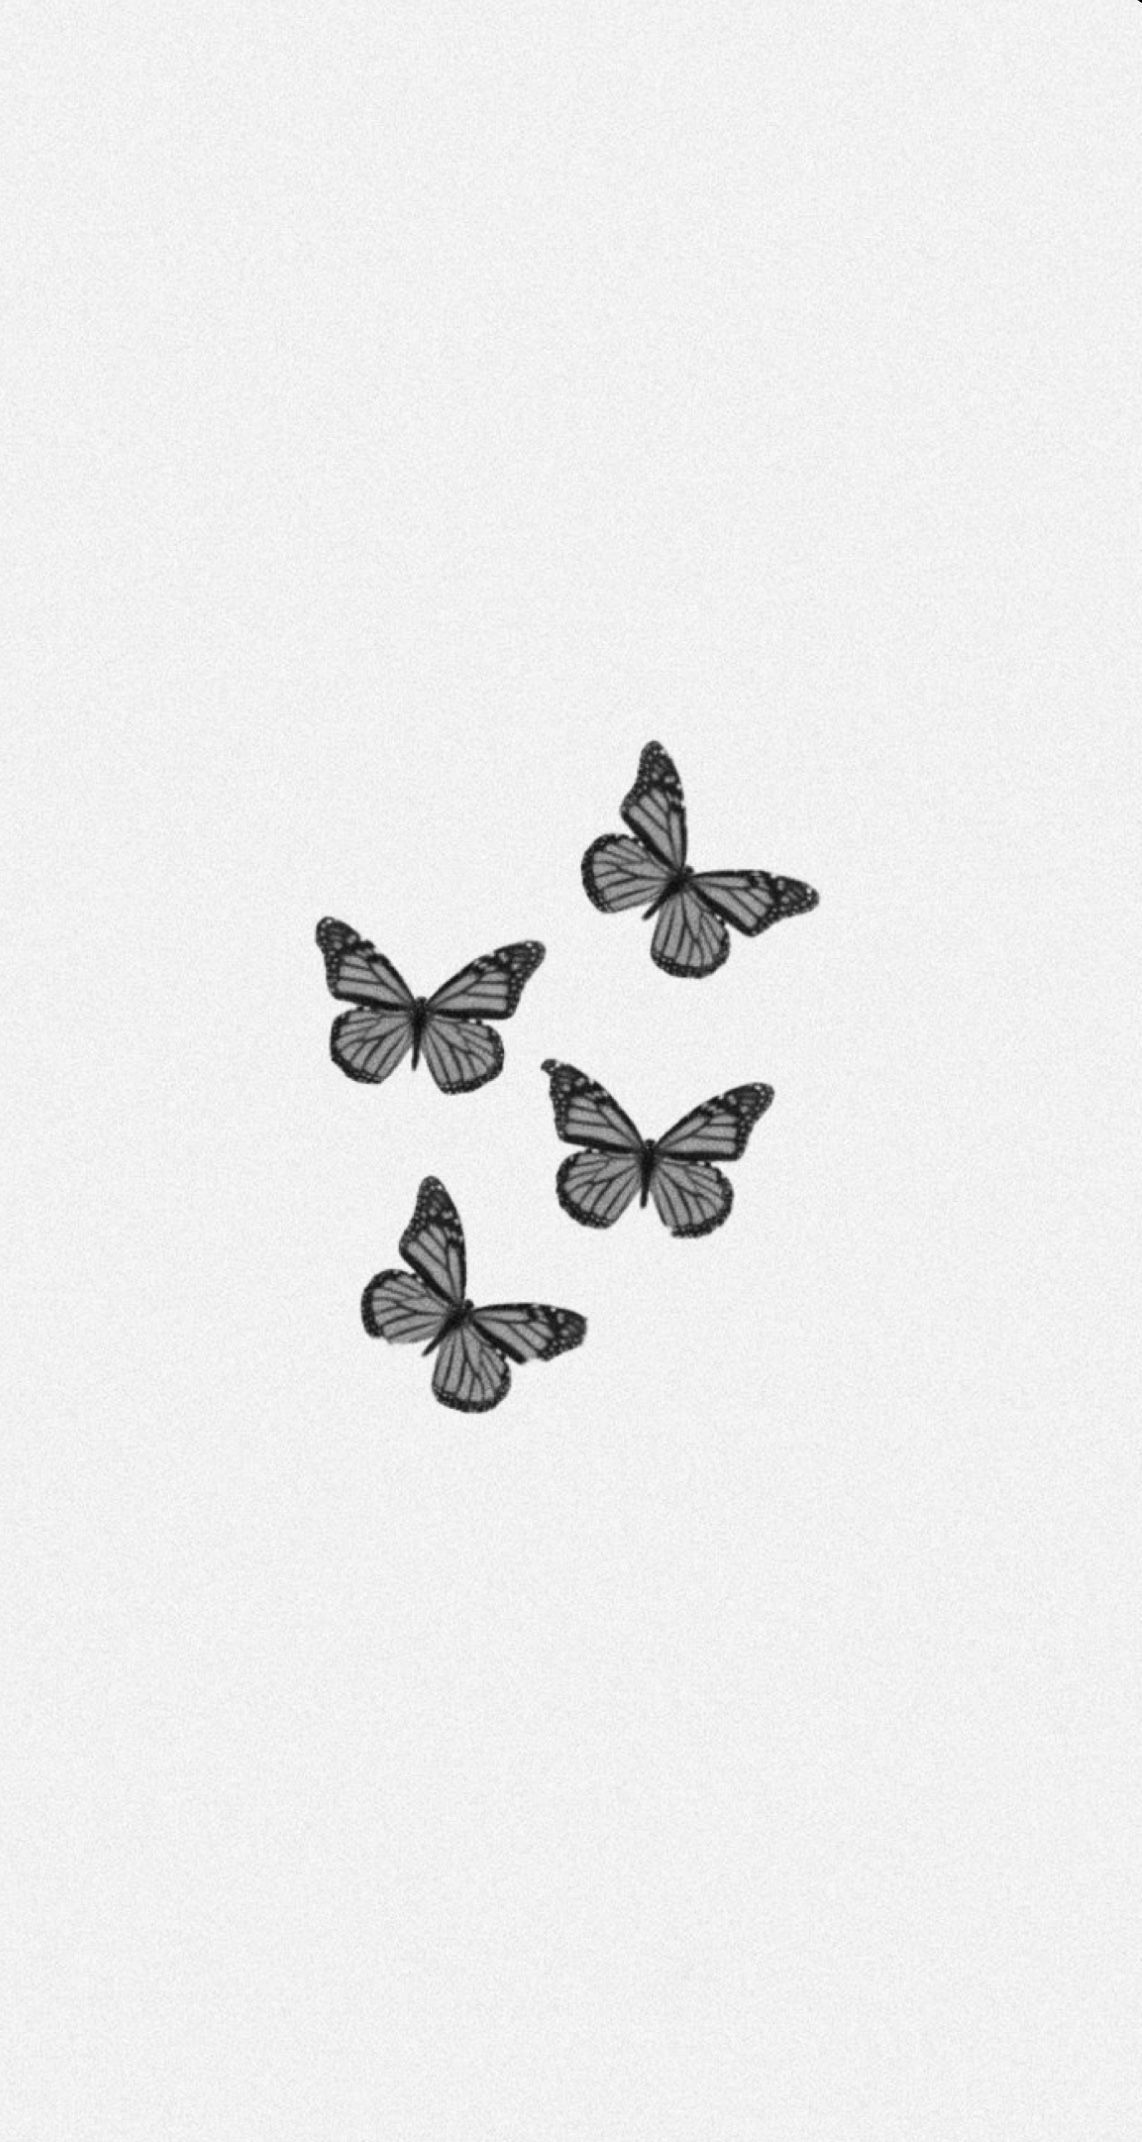 Four black butterflies on a white background - Black and white